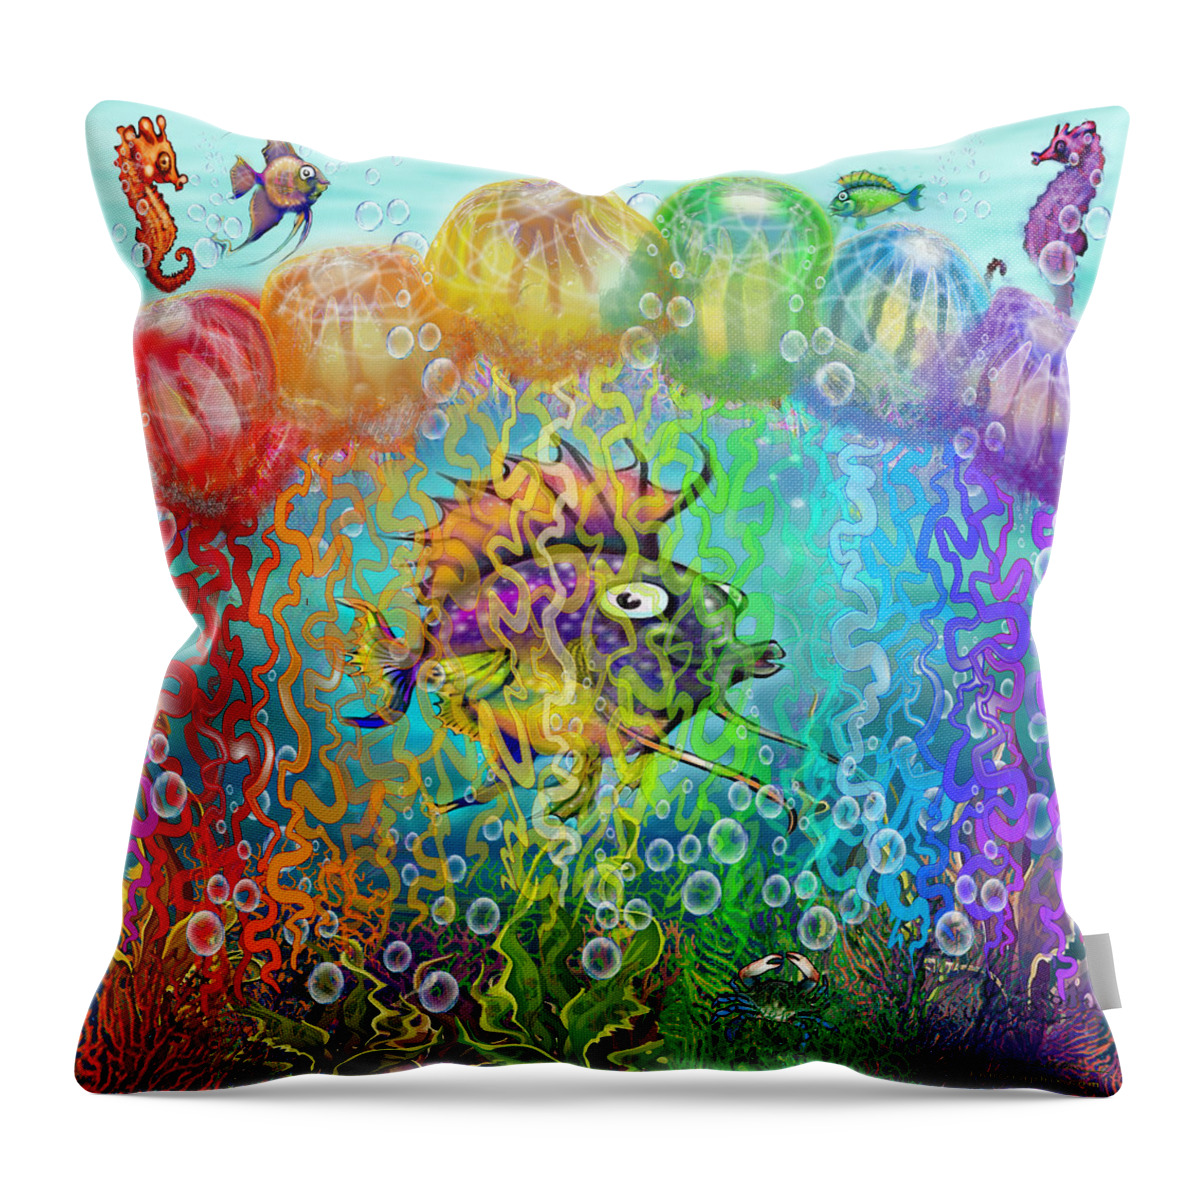 Rainbow Throw Pillow featuring the digital art Rainbow Tentacles #1 by Kevin Middleton